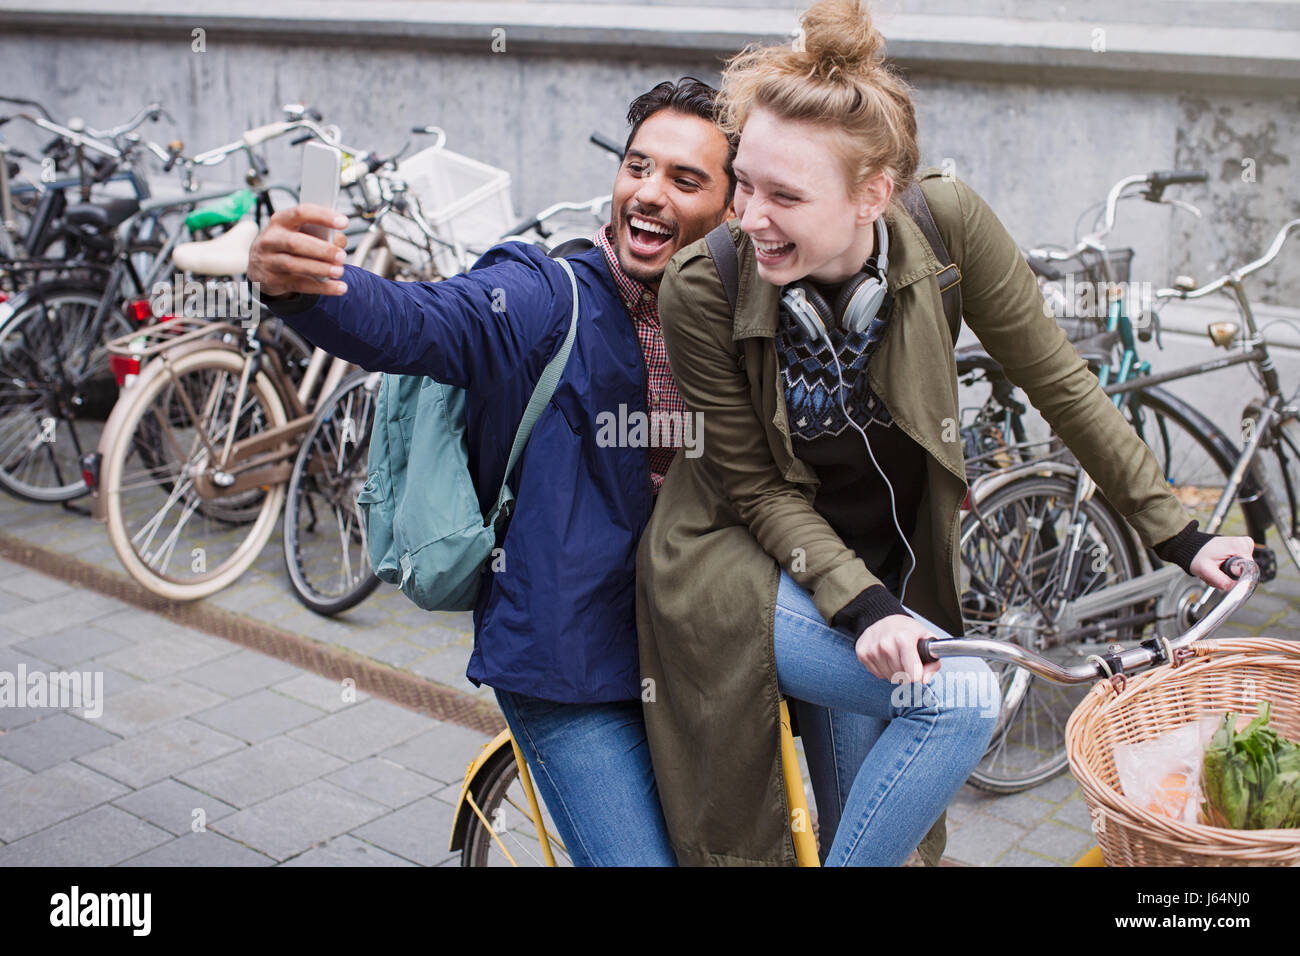 Playful, laughing young couple taking selfie with camera phone on bicycle Stock Photo